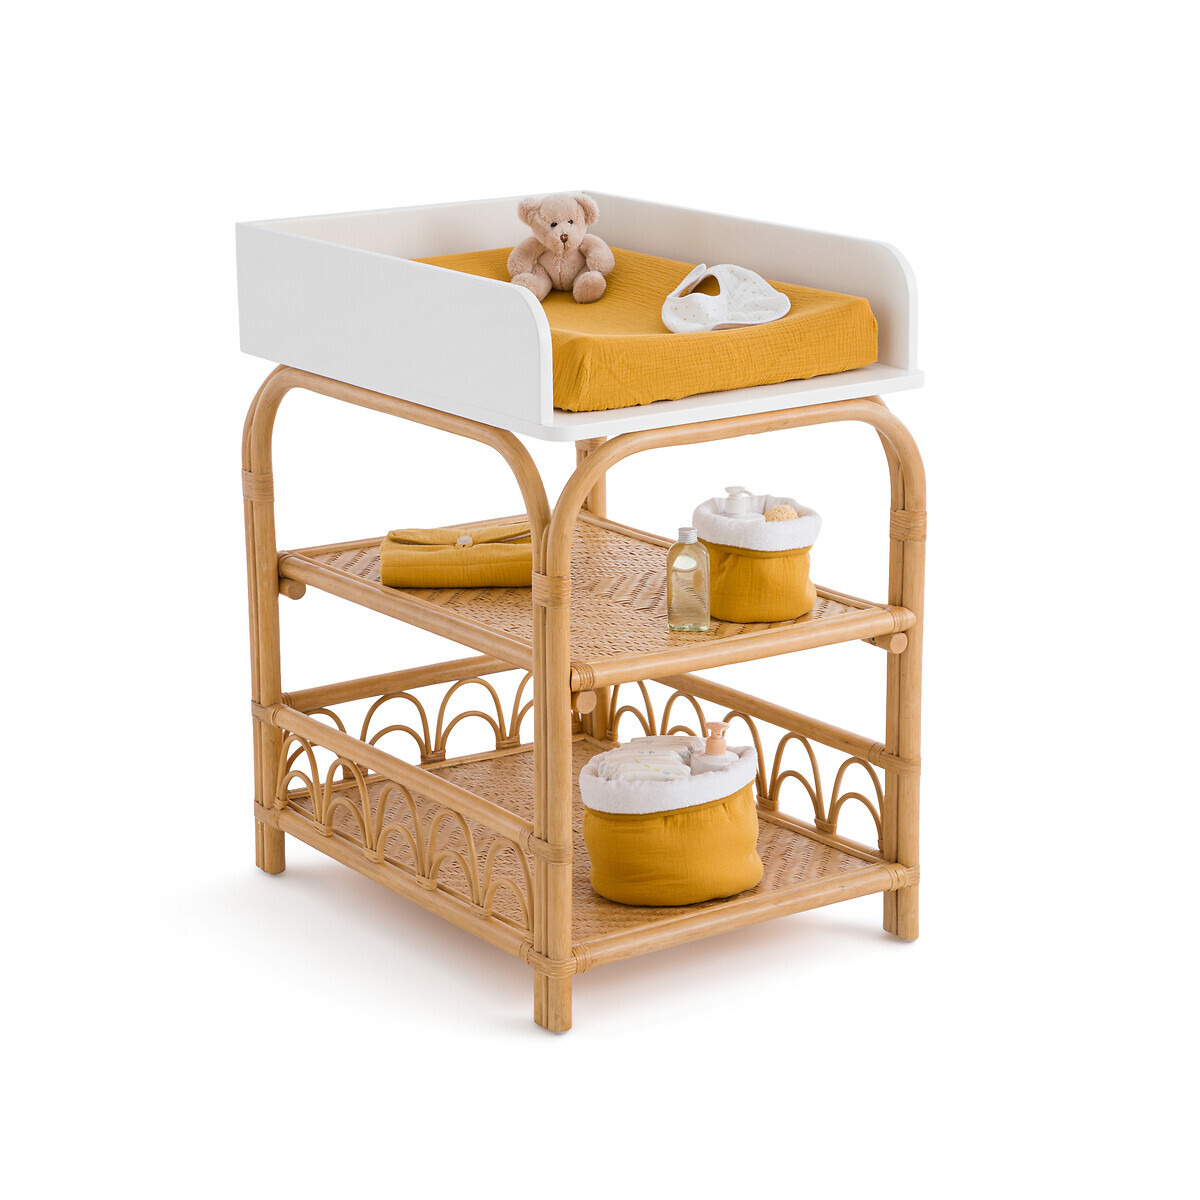 Charlie Painted Wood & Rattan Changing Table - image 1